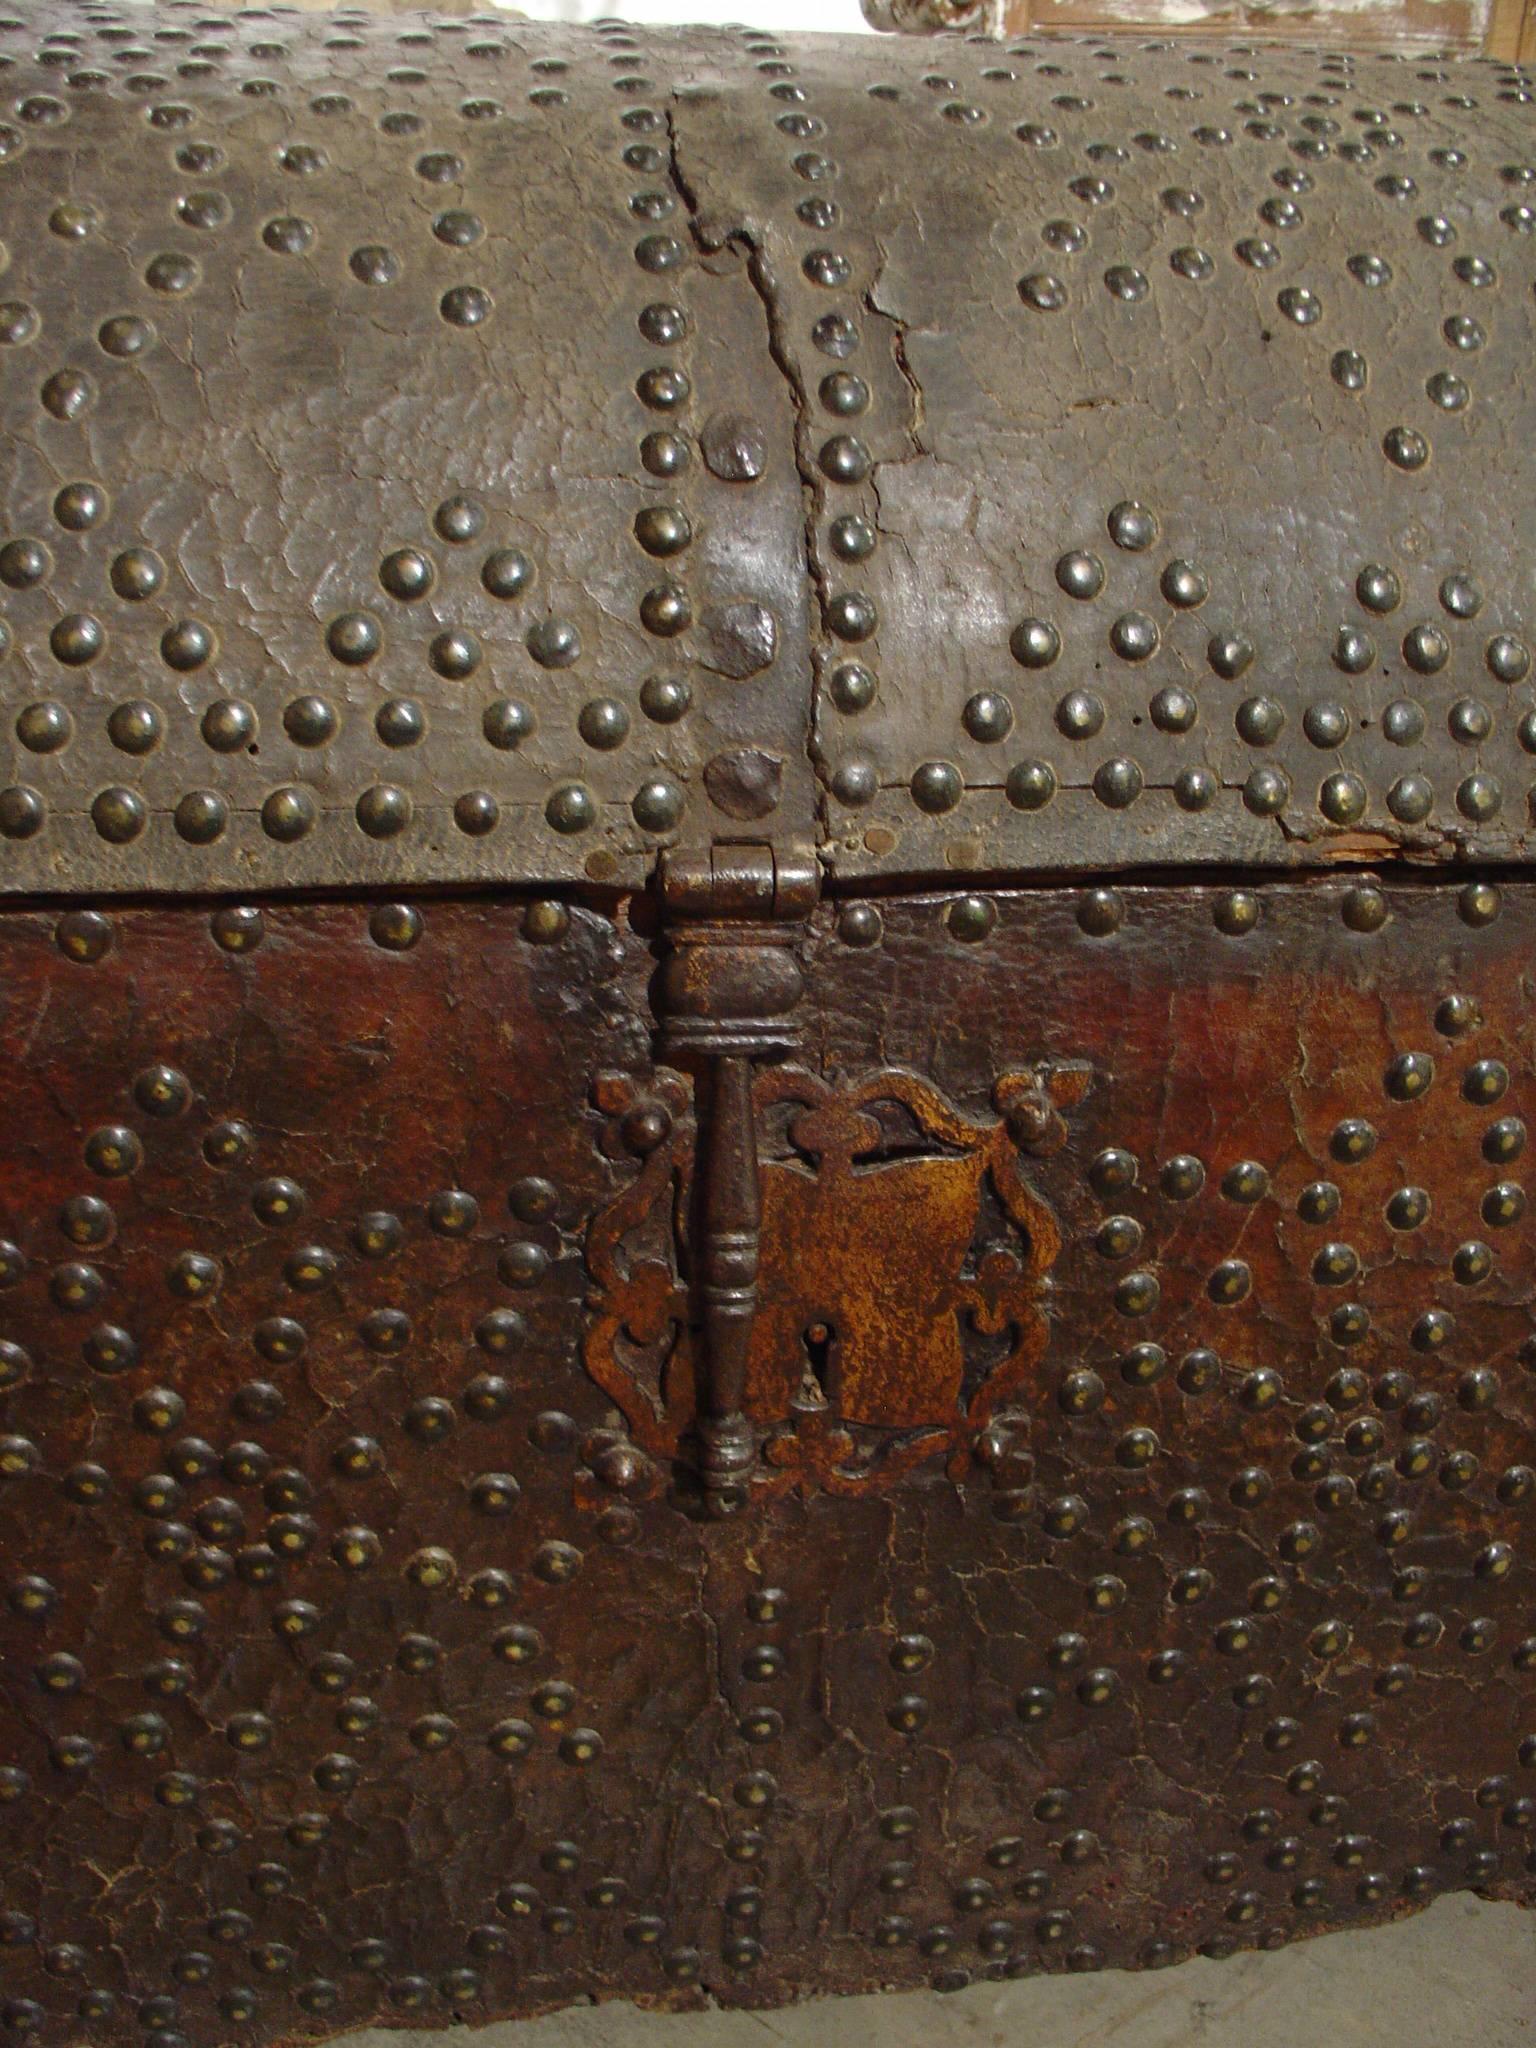 17th Century Rounded Top Leather Trunk from Spain 1